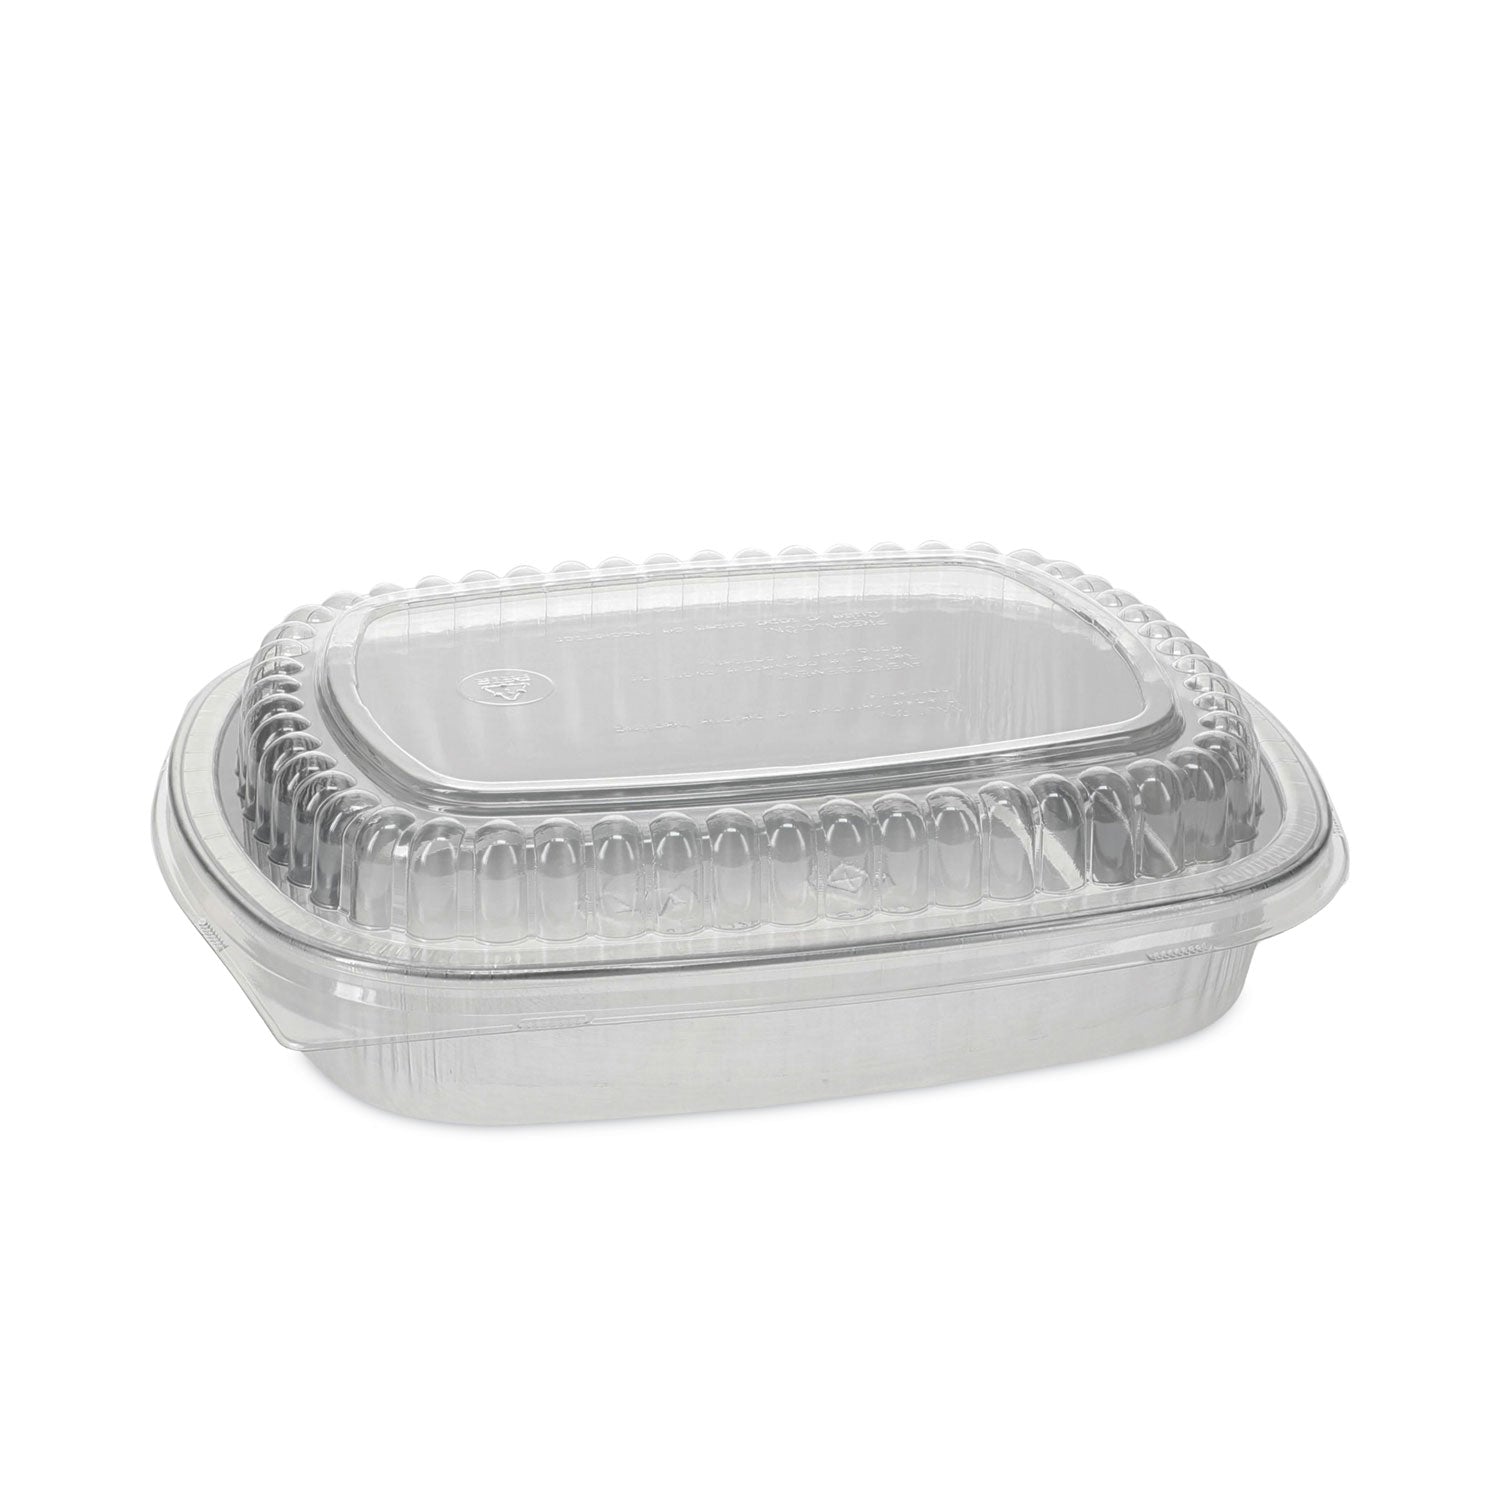 classic-carry-out-container-46-oz-975-x-775-x-175-silver-aluminum-50-carton_pcty6710pwpsfg - 1